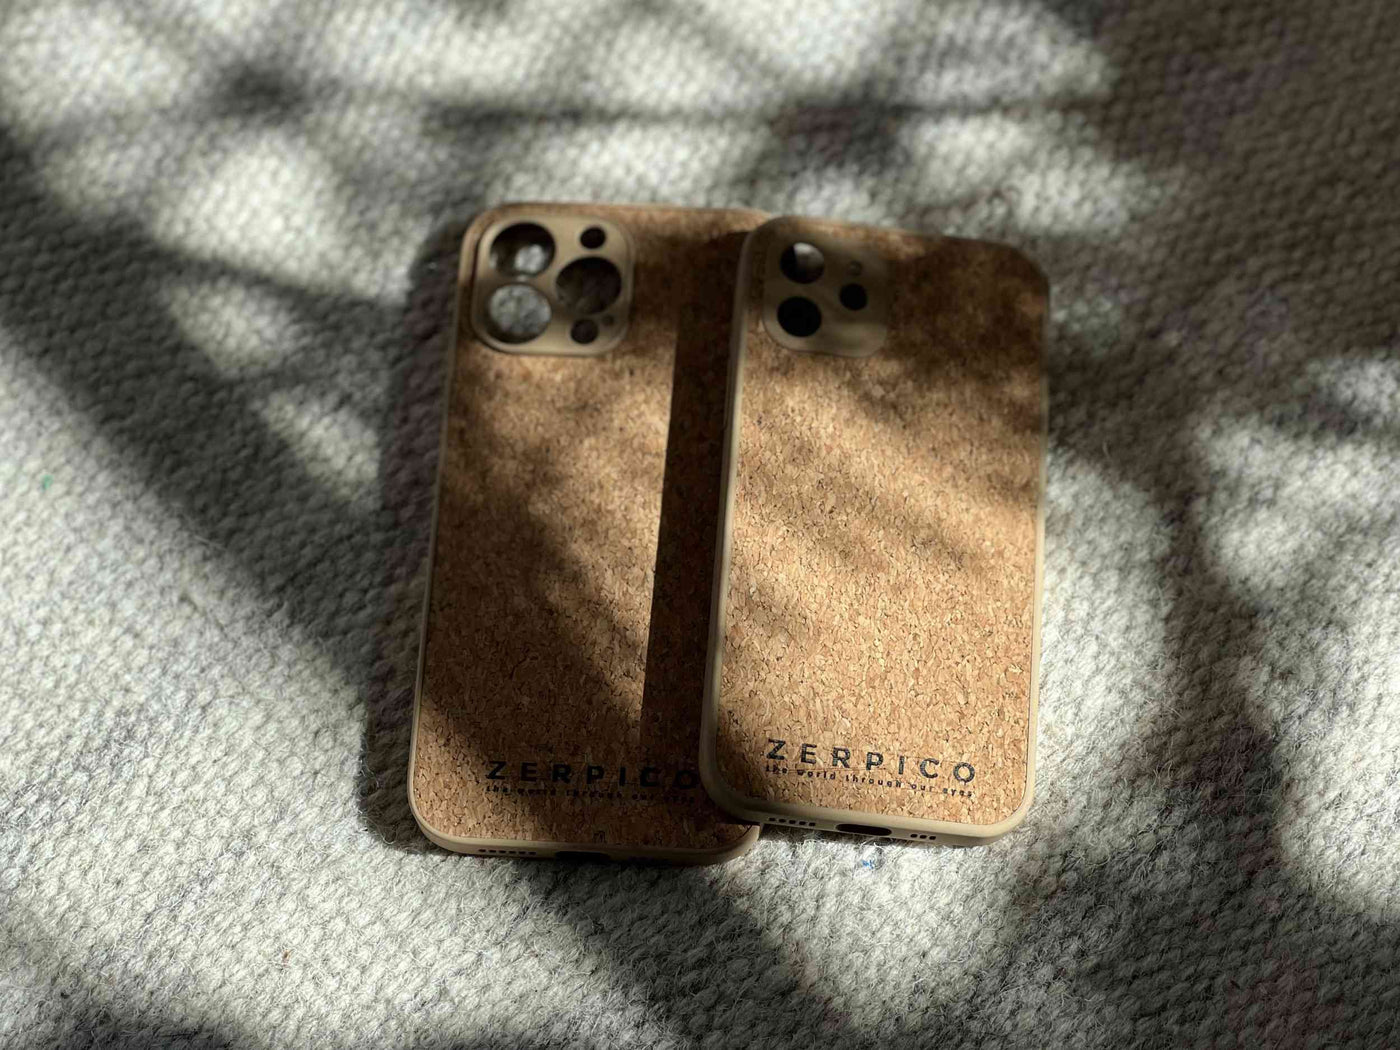 Mobile phone cases made of wood and cork.